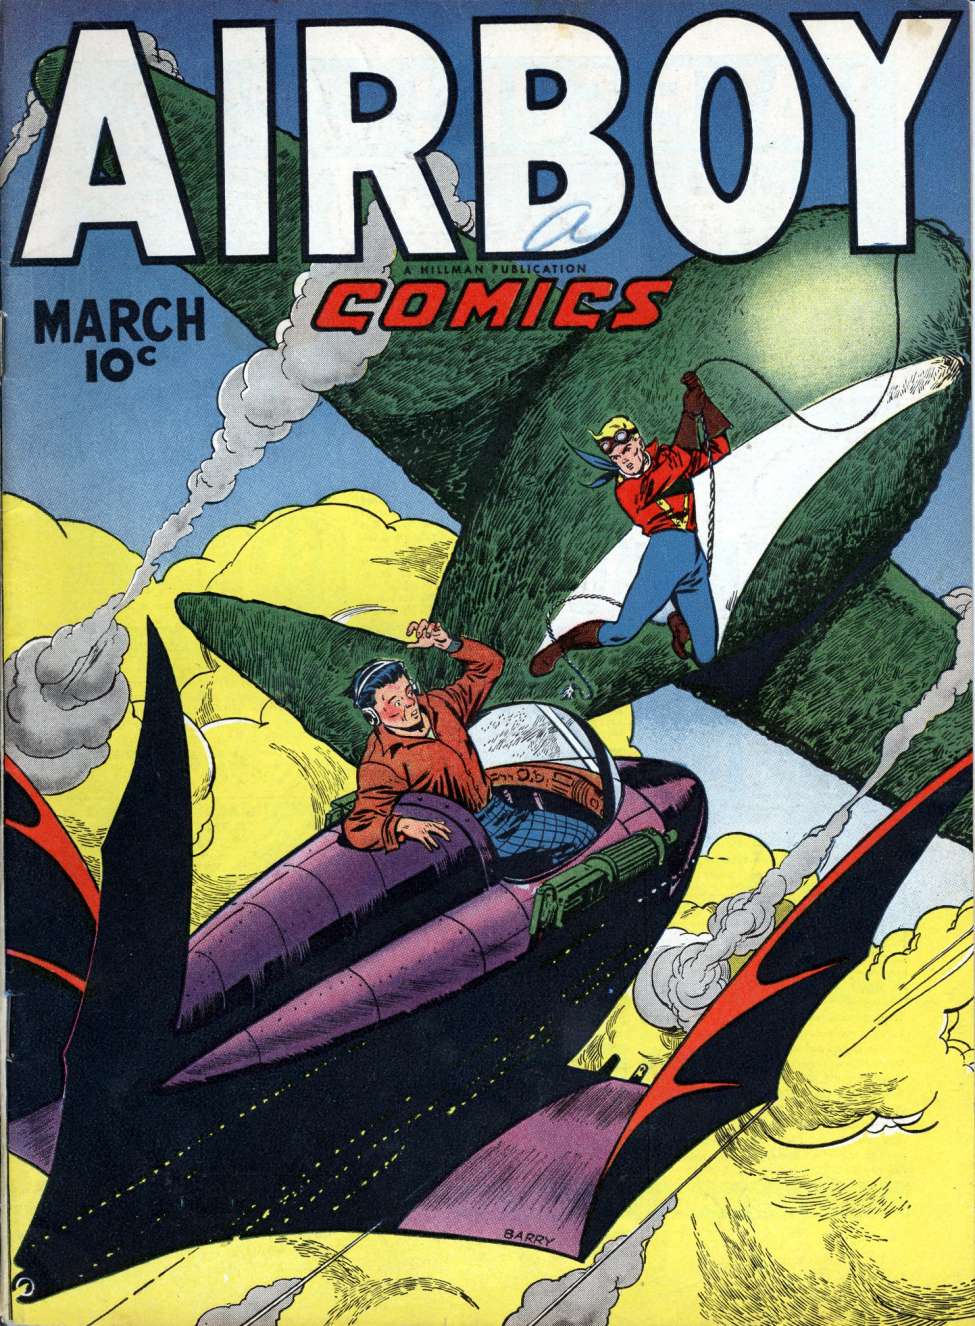 Book Cover For Airboy Comics v4 2